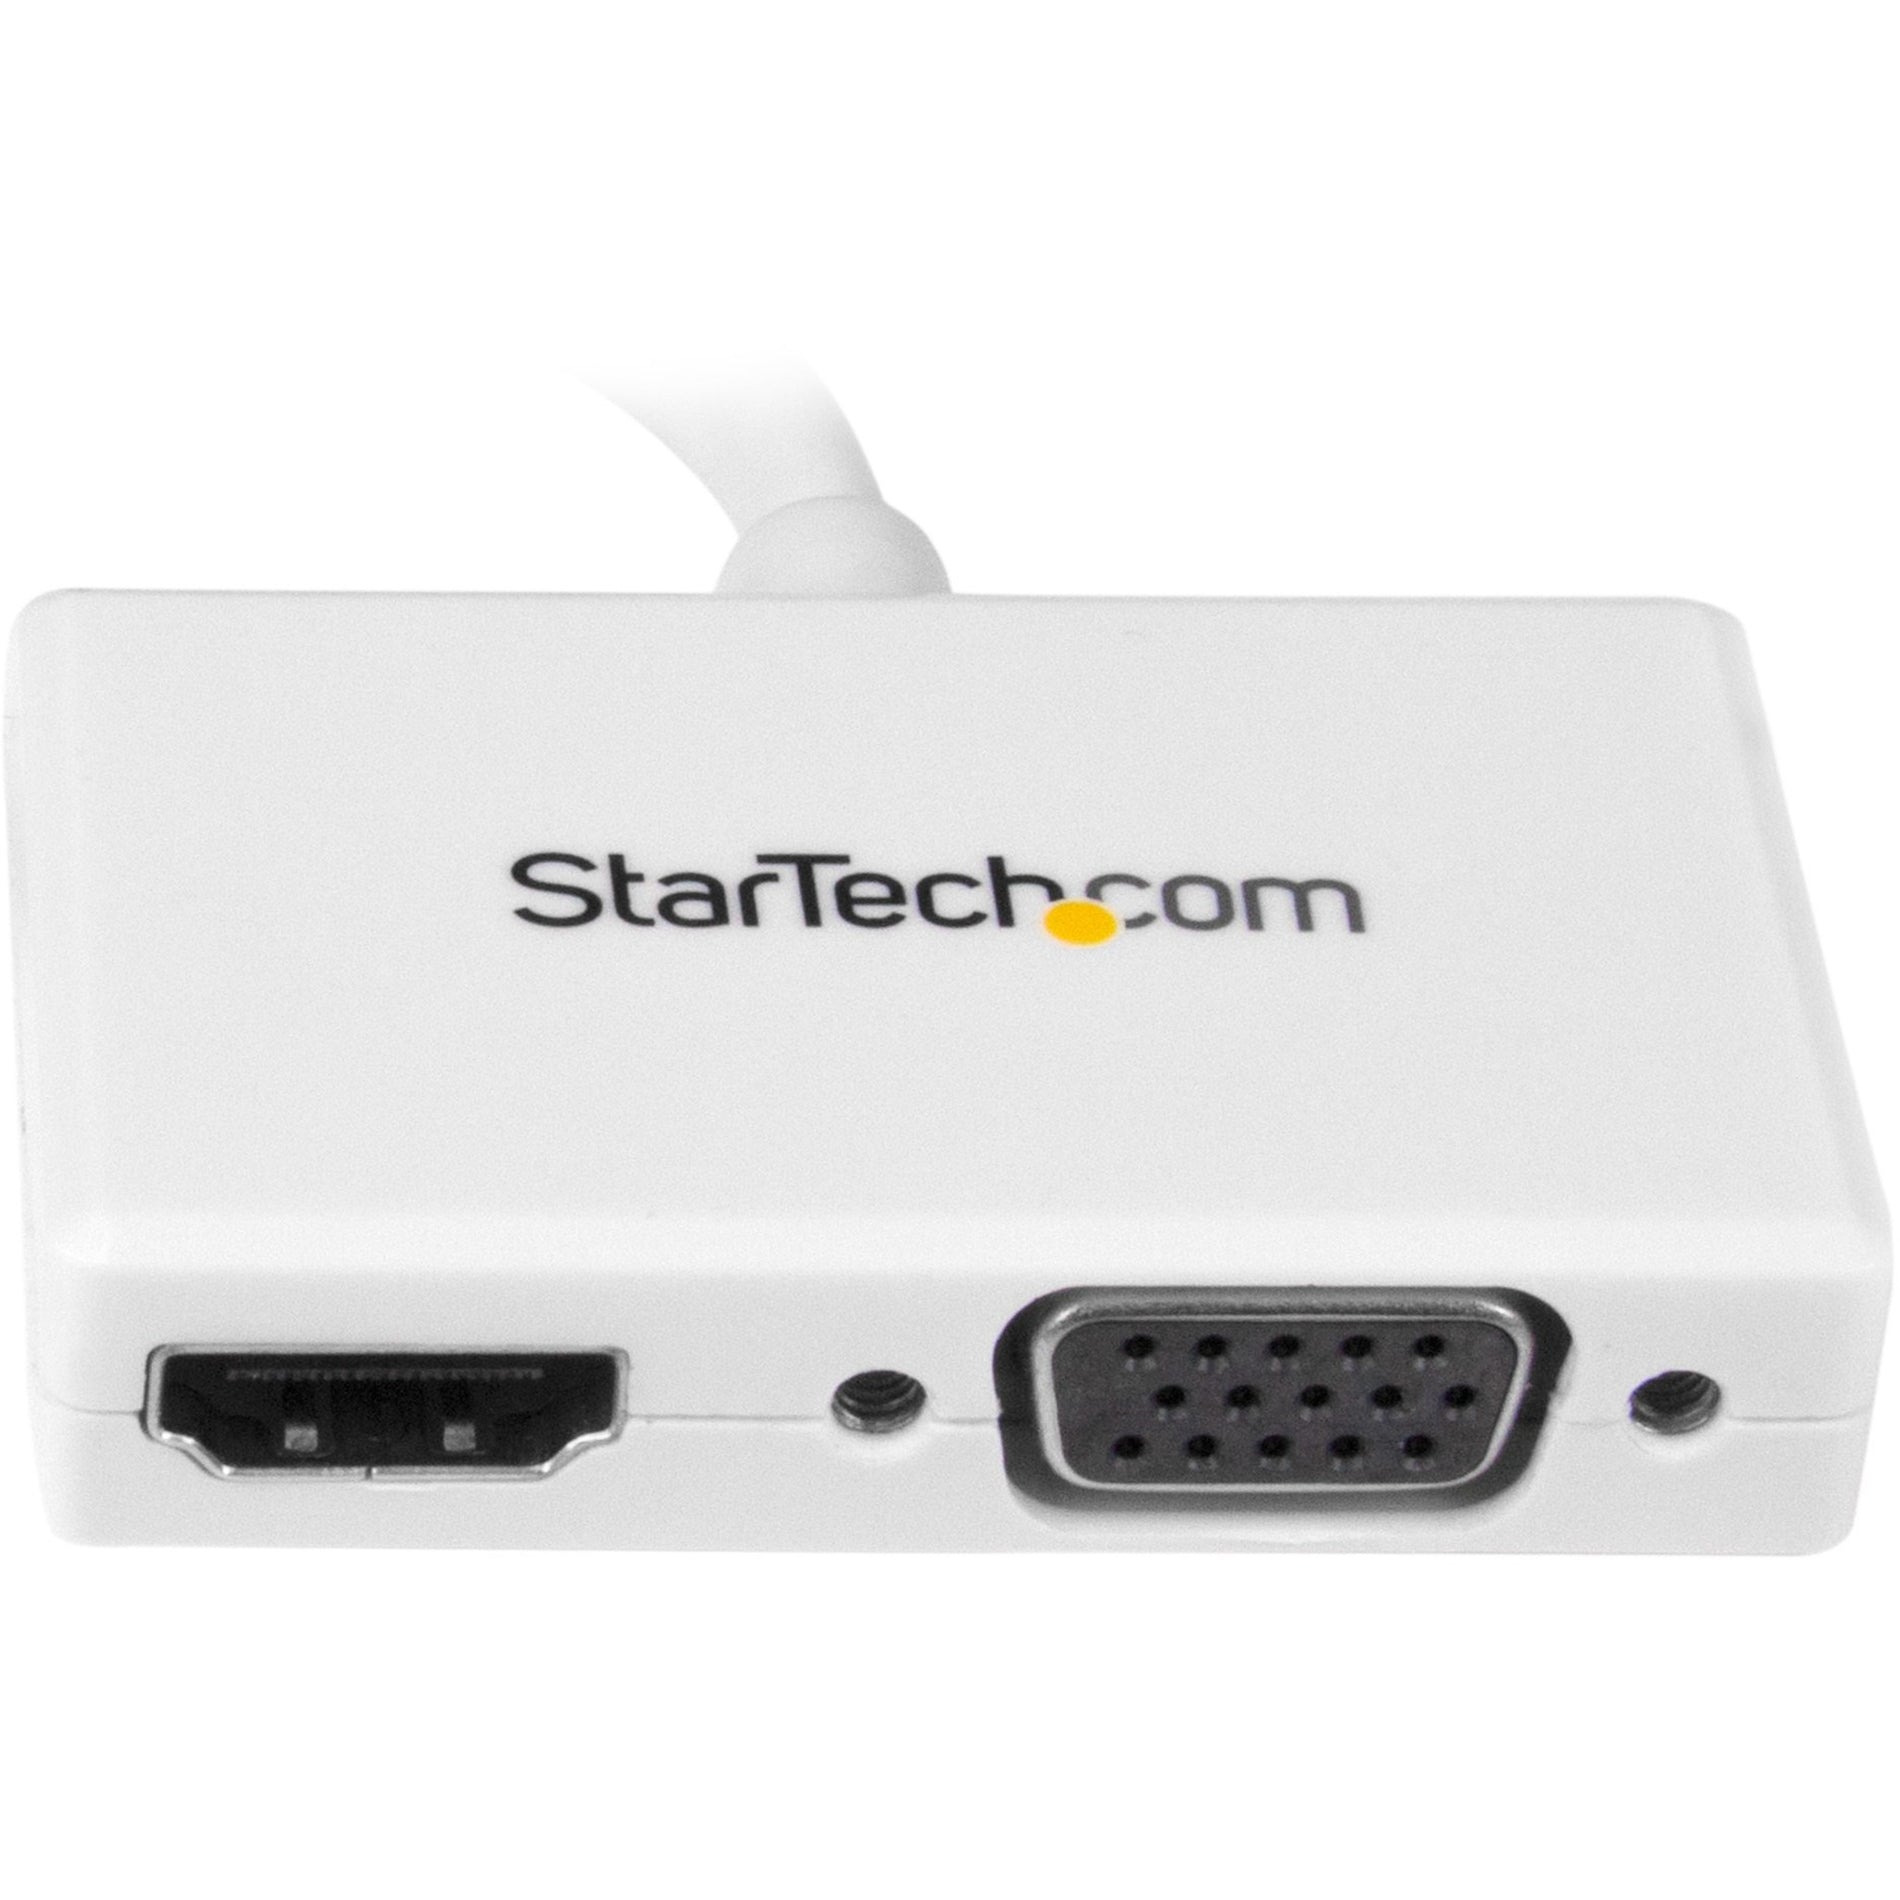 StarTech.com MDP2HDVGAW Travel A/V Adapter - 2-in-1 Mini DisplayPort to HDMI or VGA Converter, White